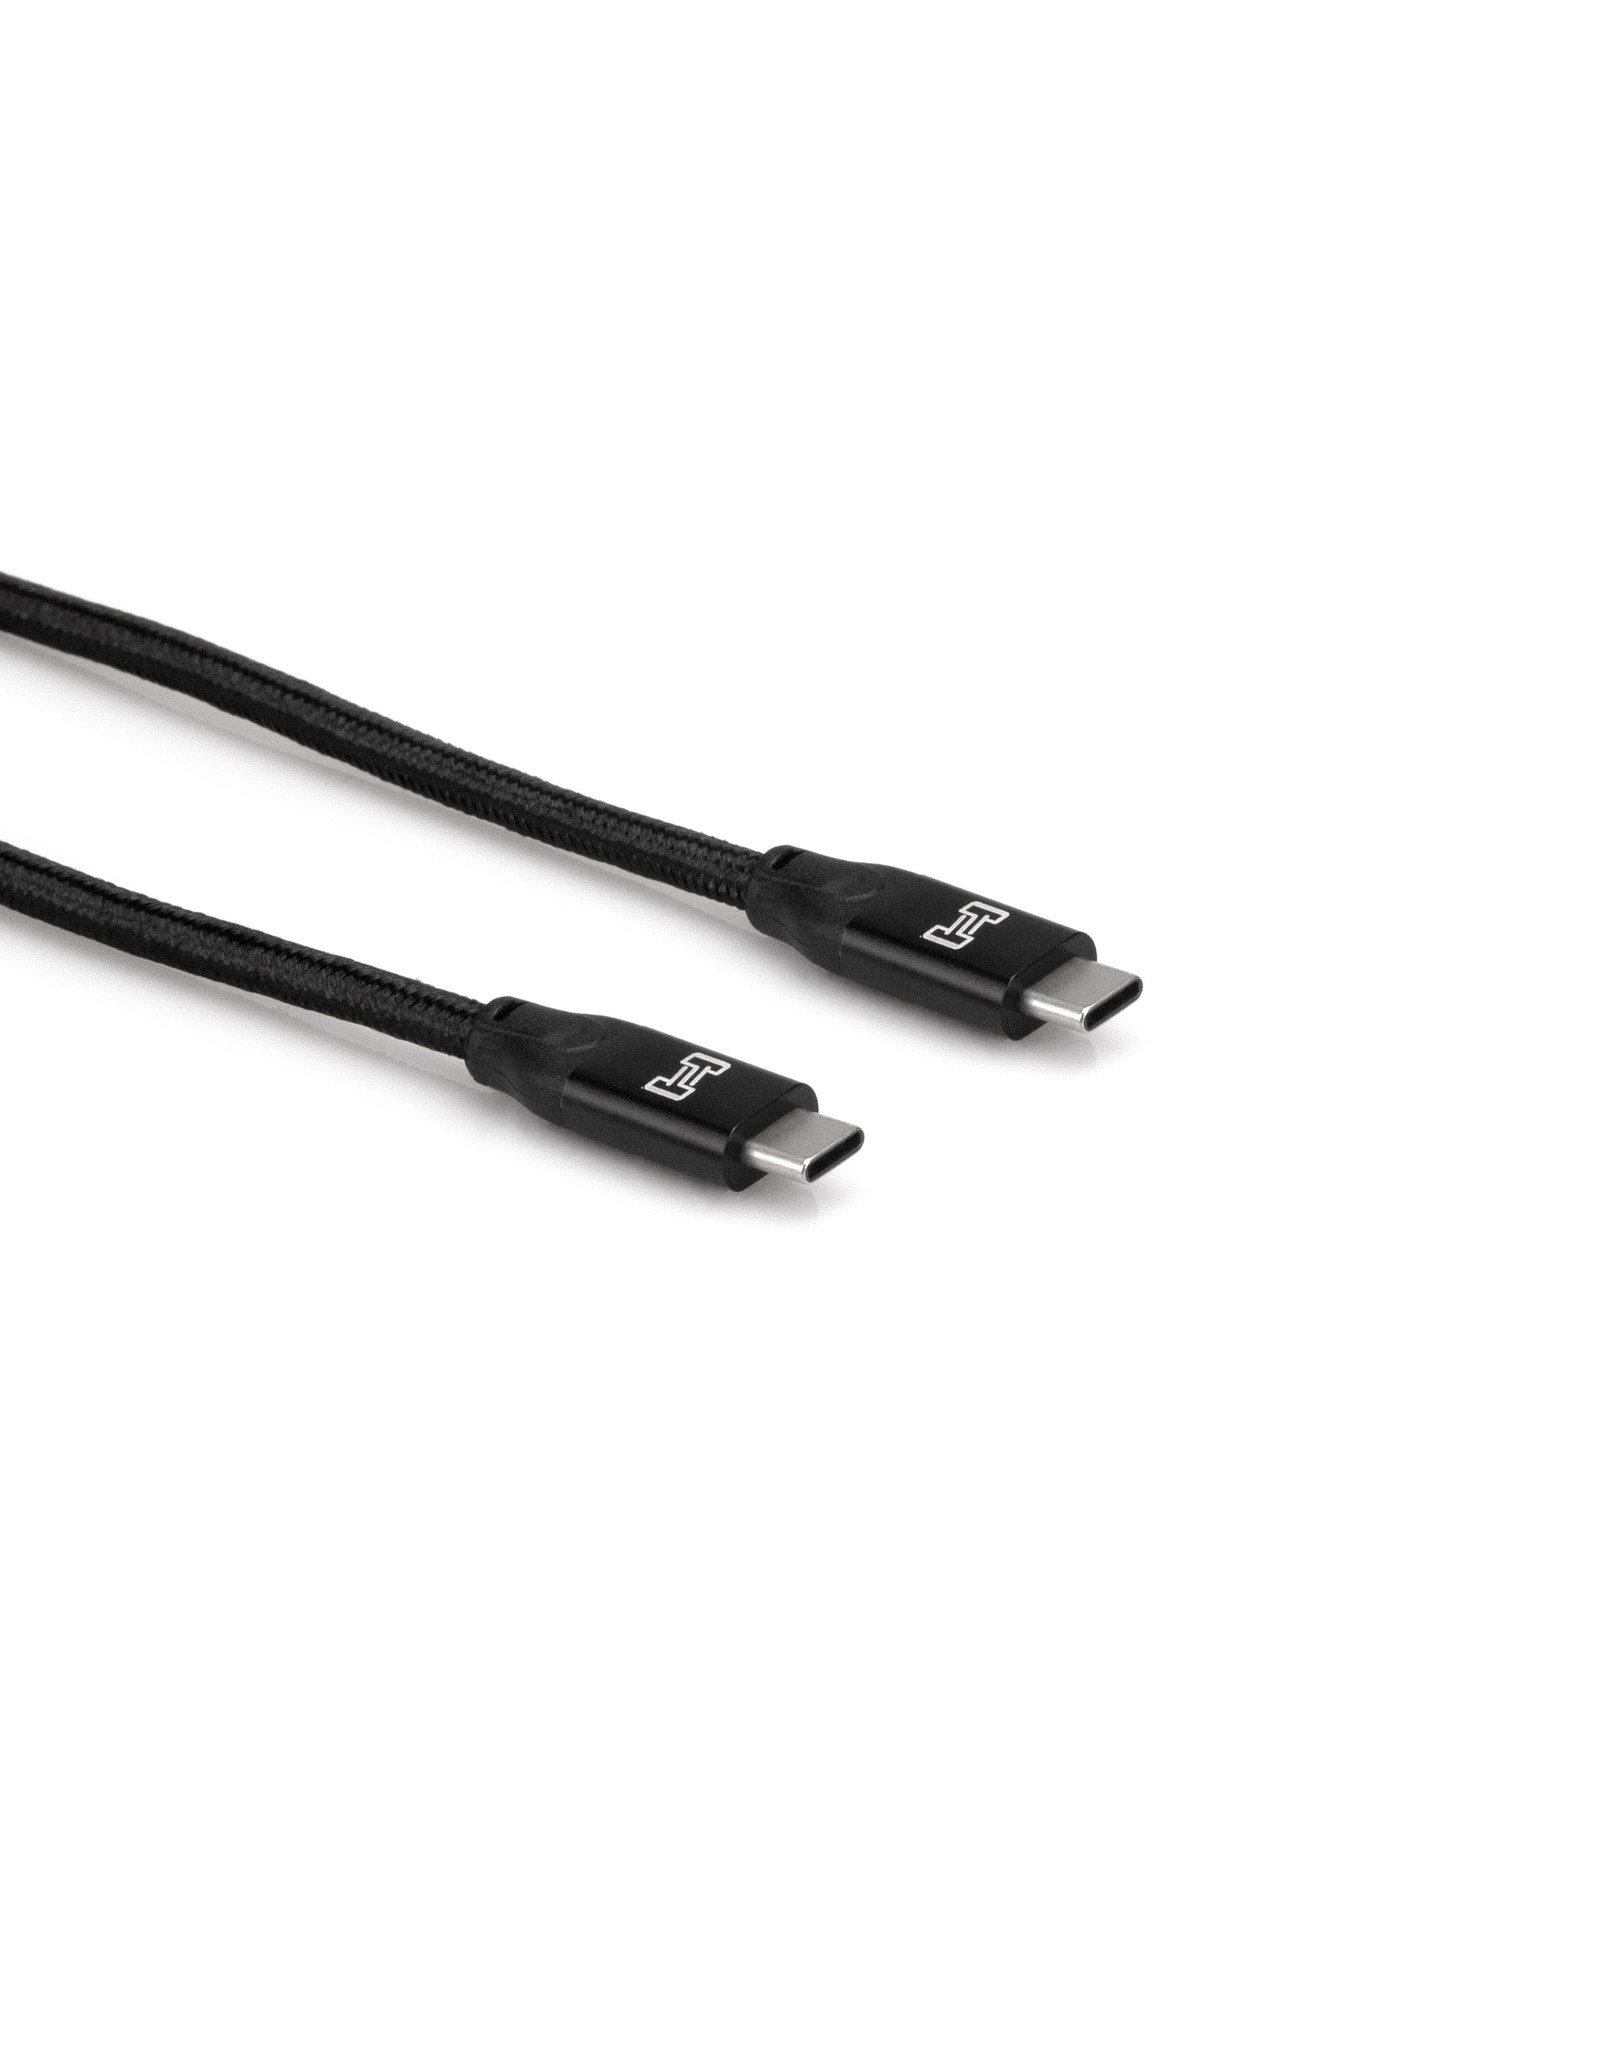 Hosa Hosa Type C to Same, SuperSpeed USB 3.1 (Gen2) Cable, 6'